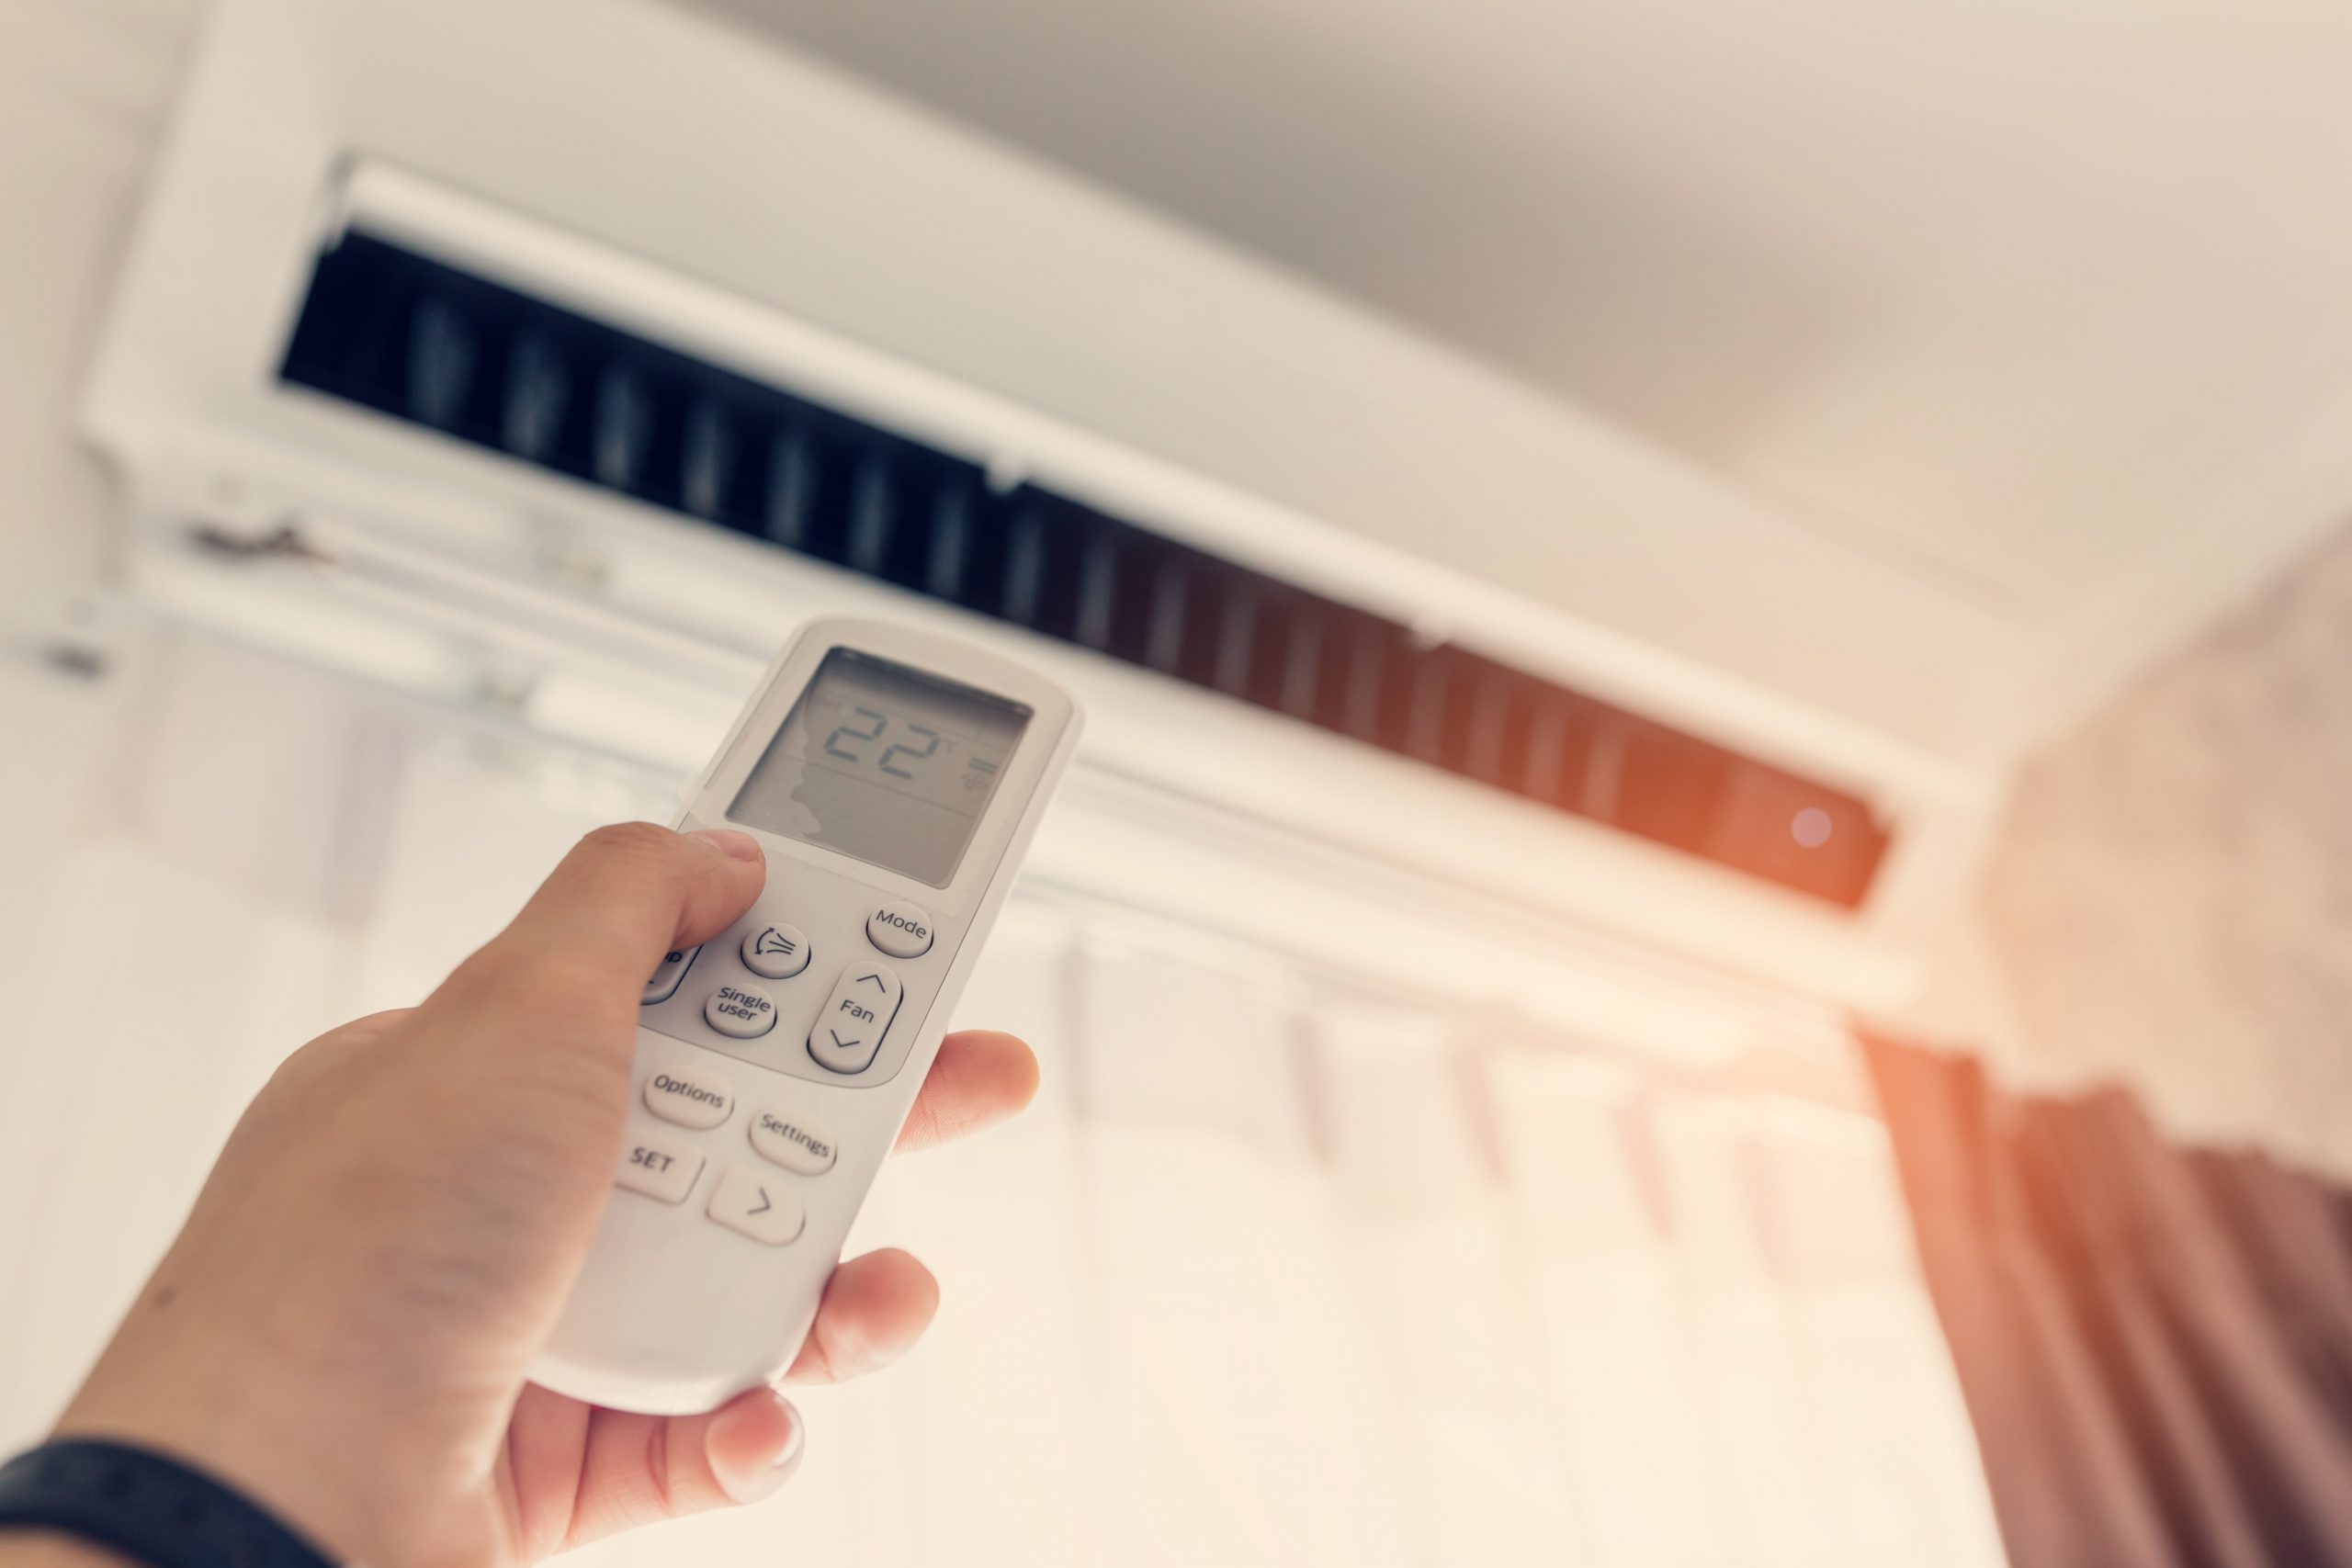 How To Fix The Error Code CH25 For LG Air Conditioner